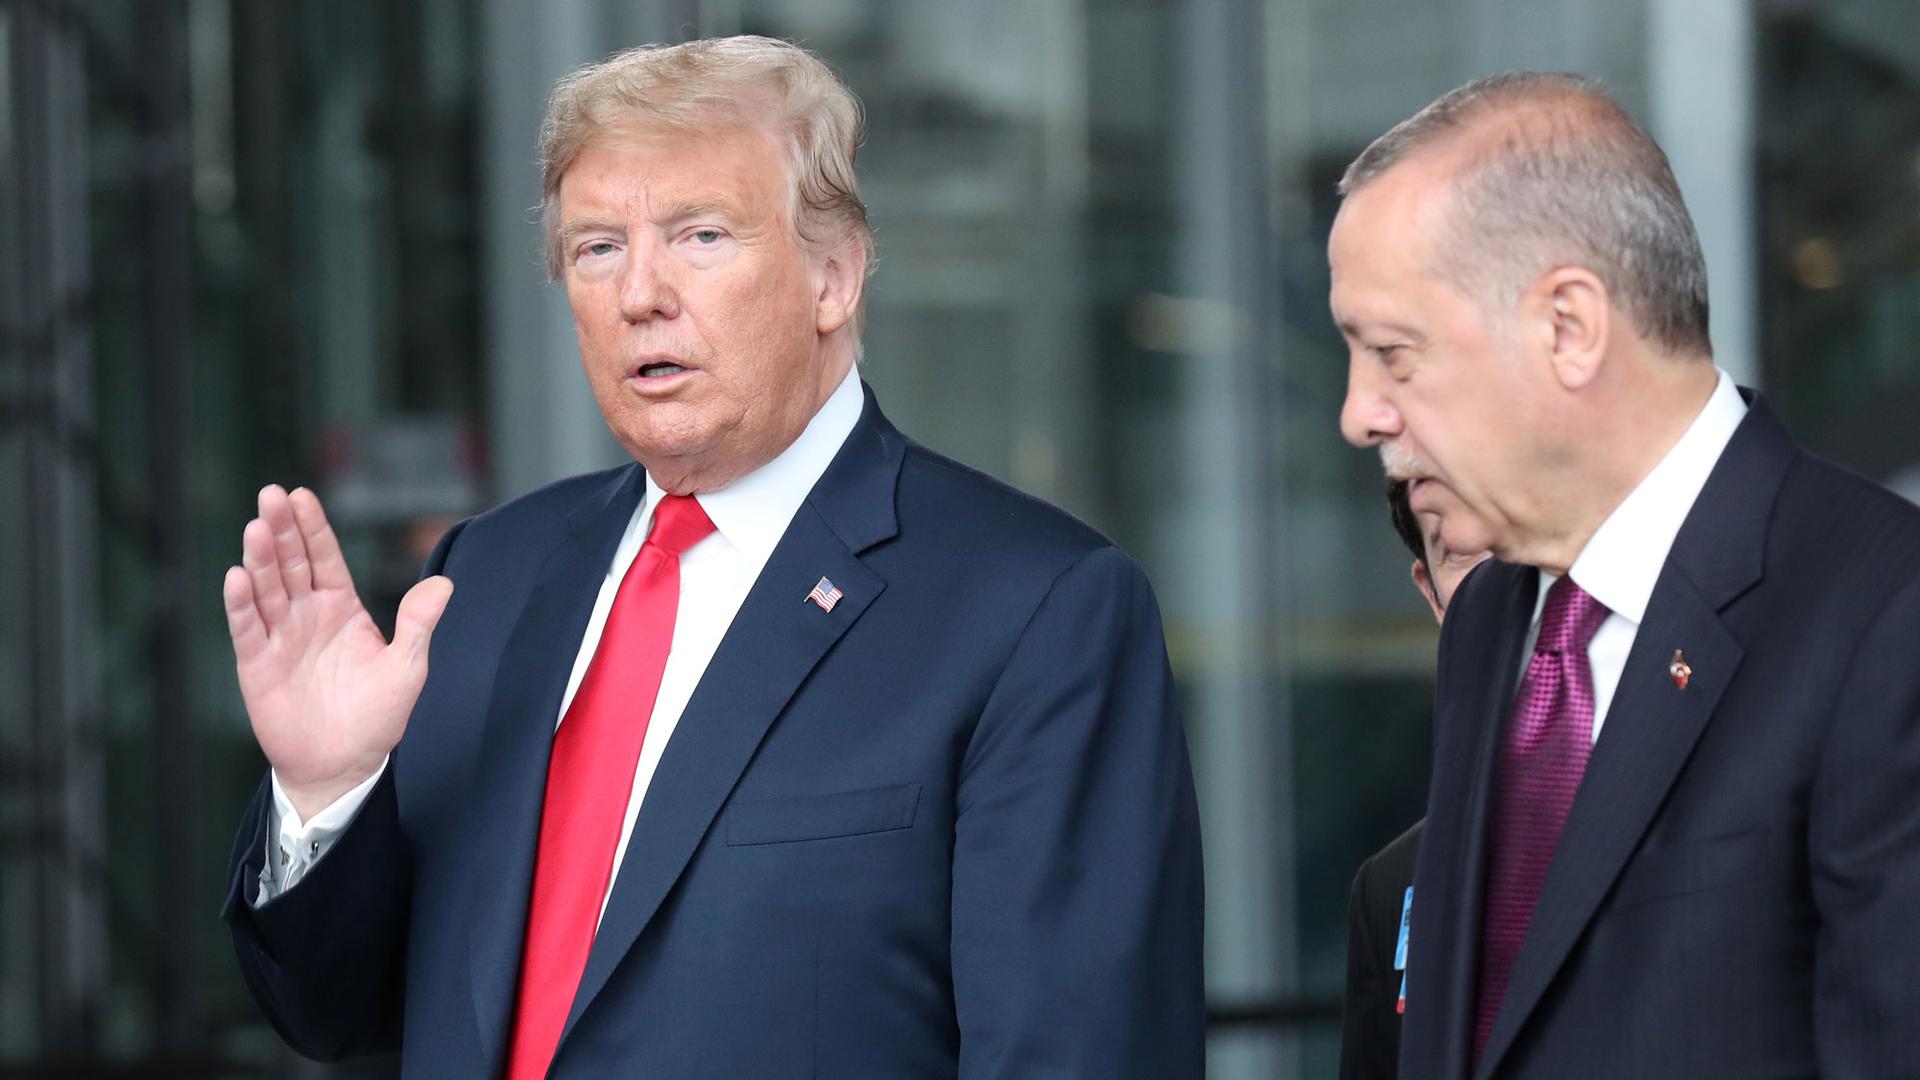 President Donald Trump is shown walking with Turkey's President Recep Tayyip Erdoğan with his right hand raised waving at the camera.